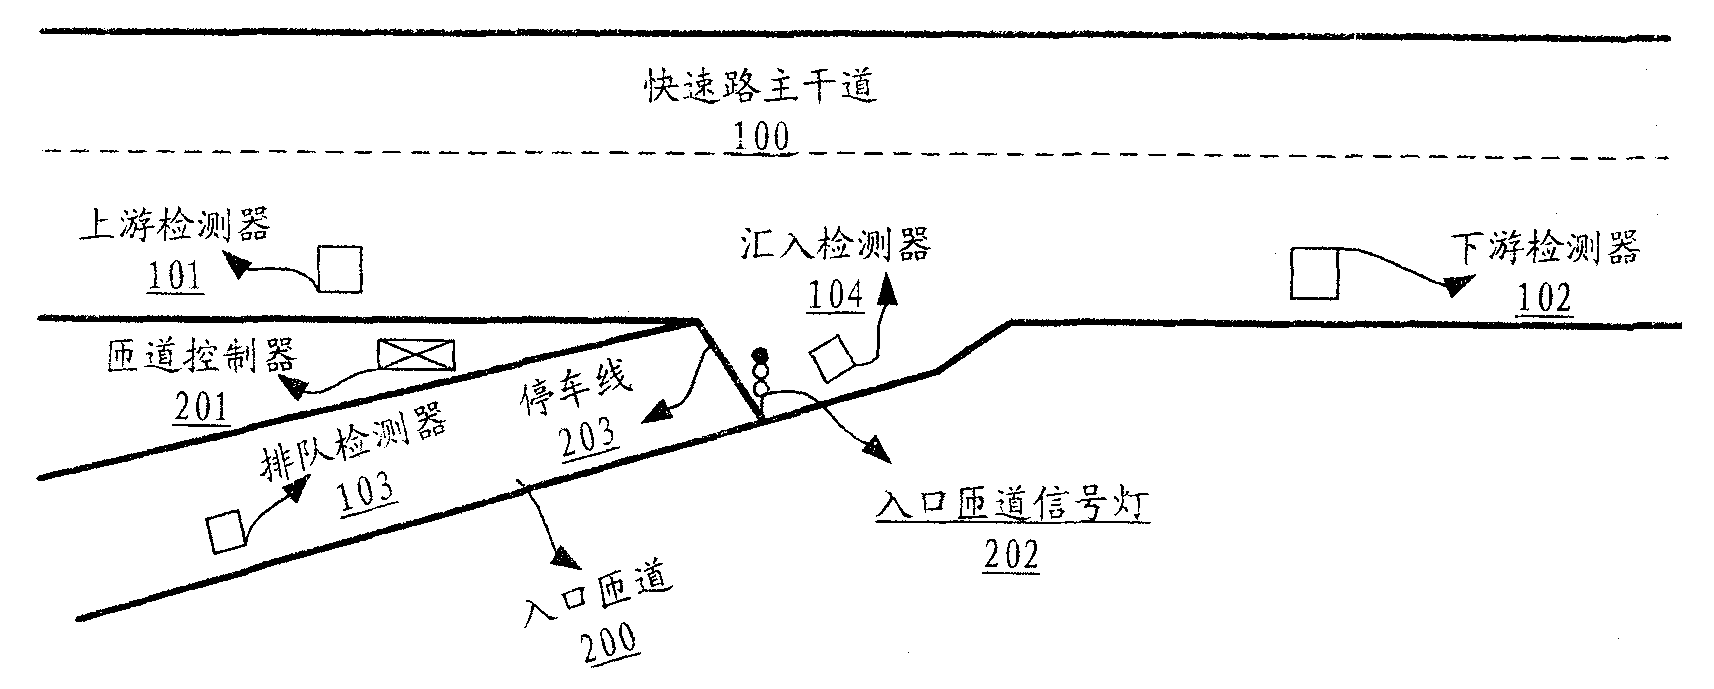 Entrance ring road self-adaptive control system and method